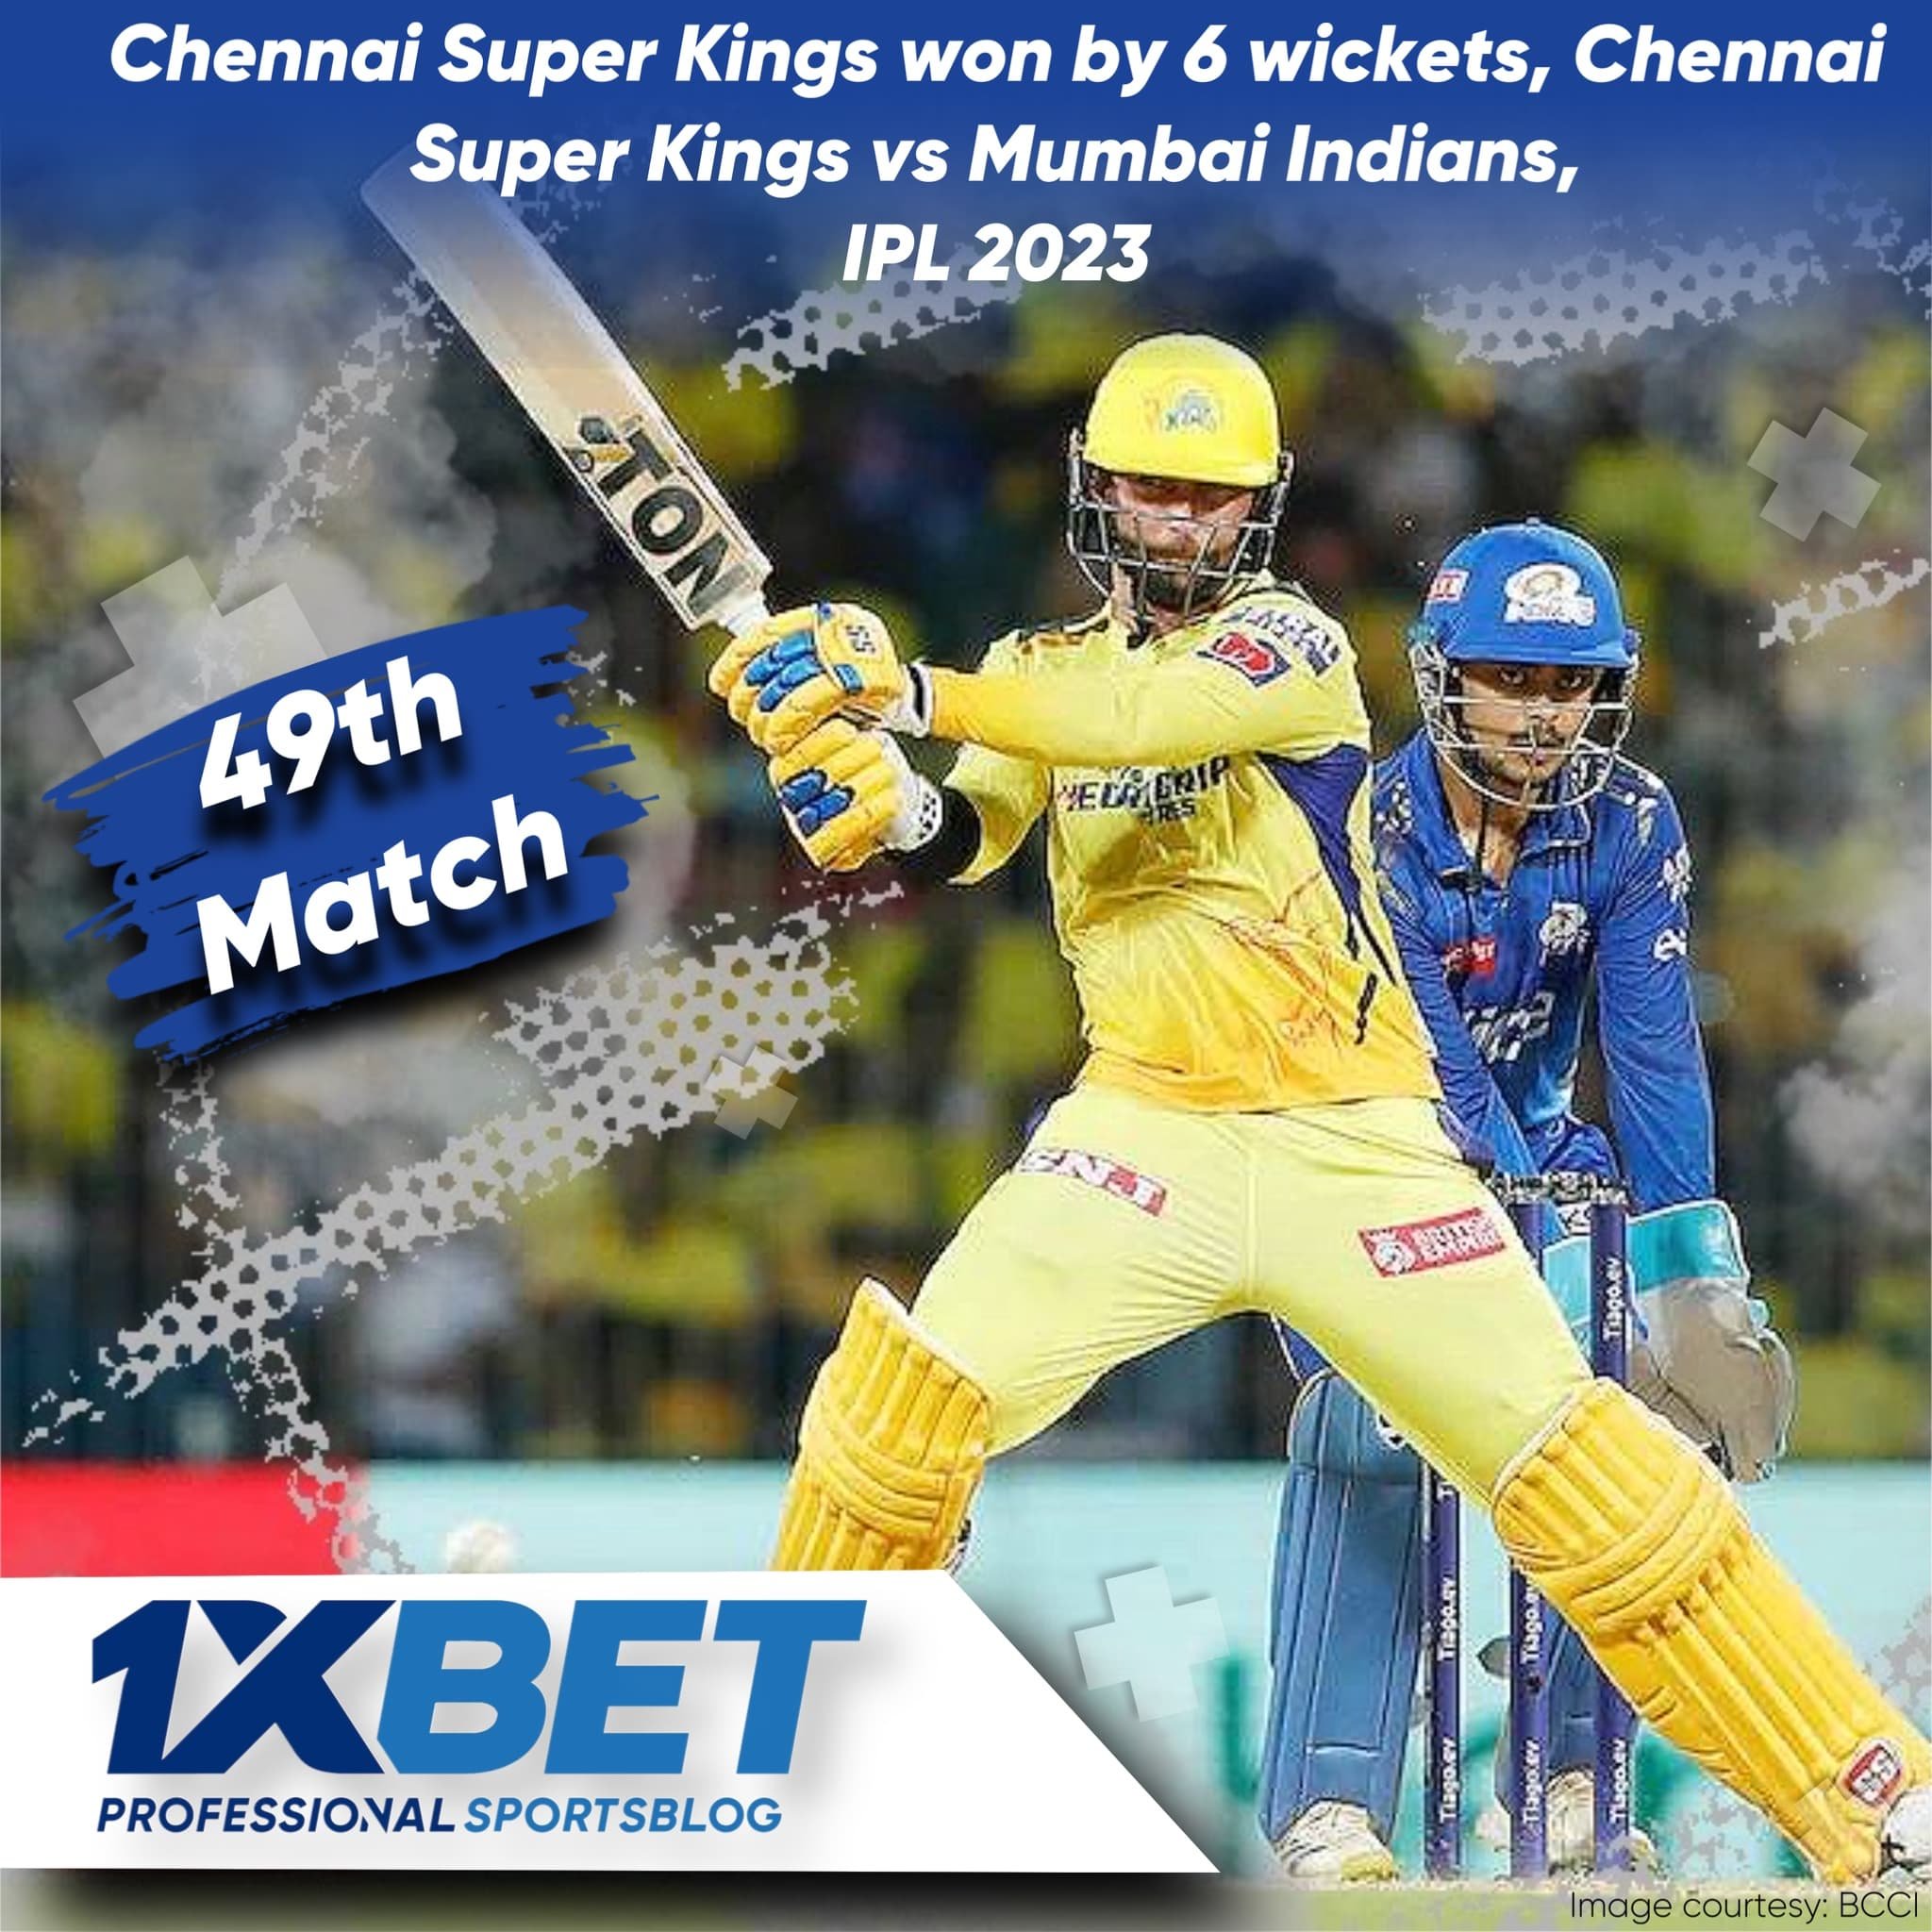 Chennai Super Kings won by 6 wickets2